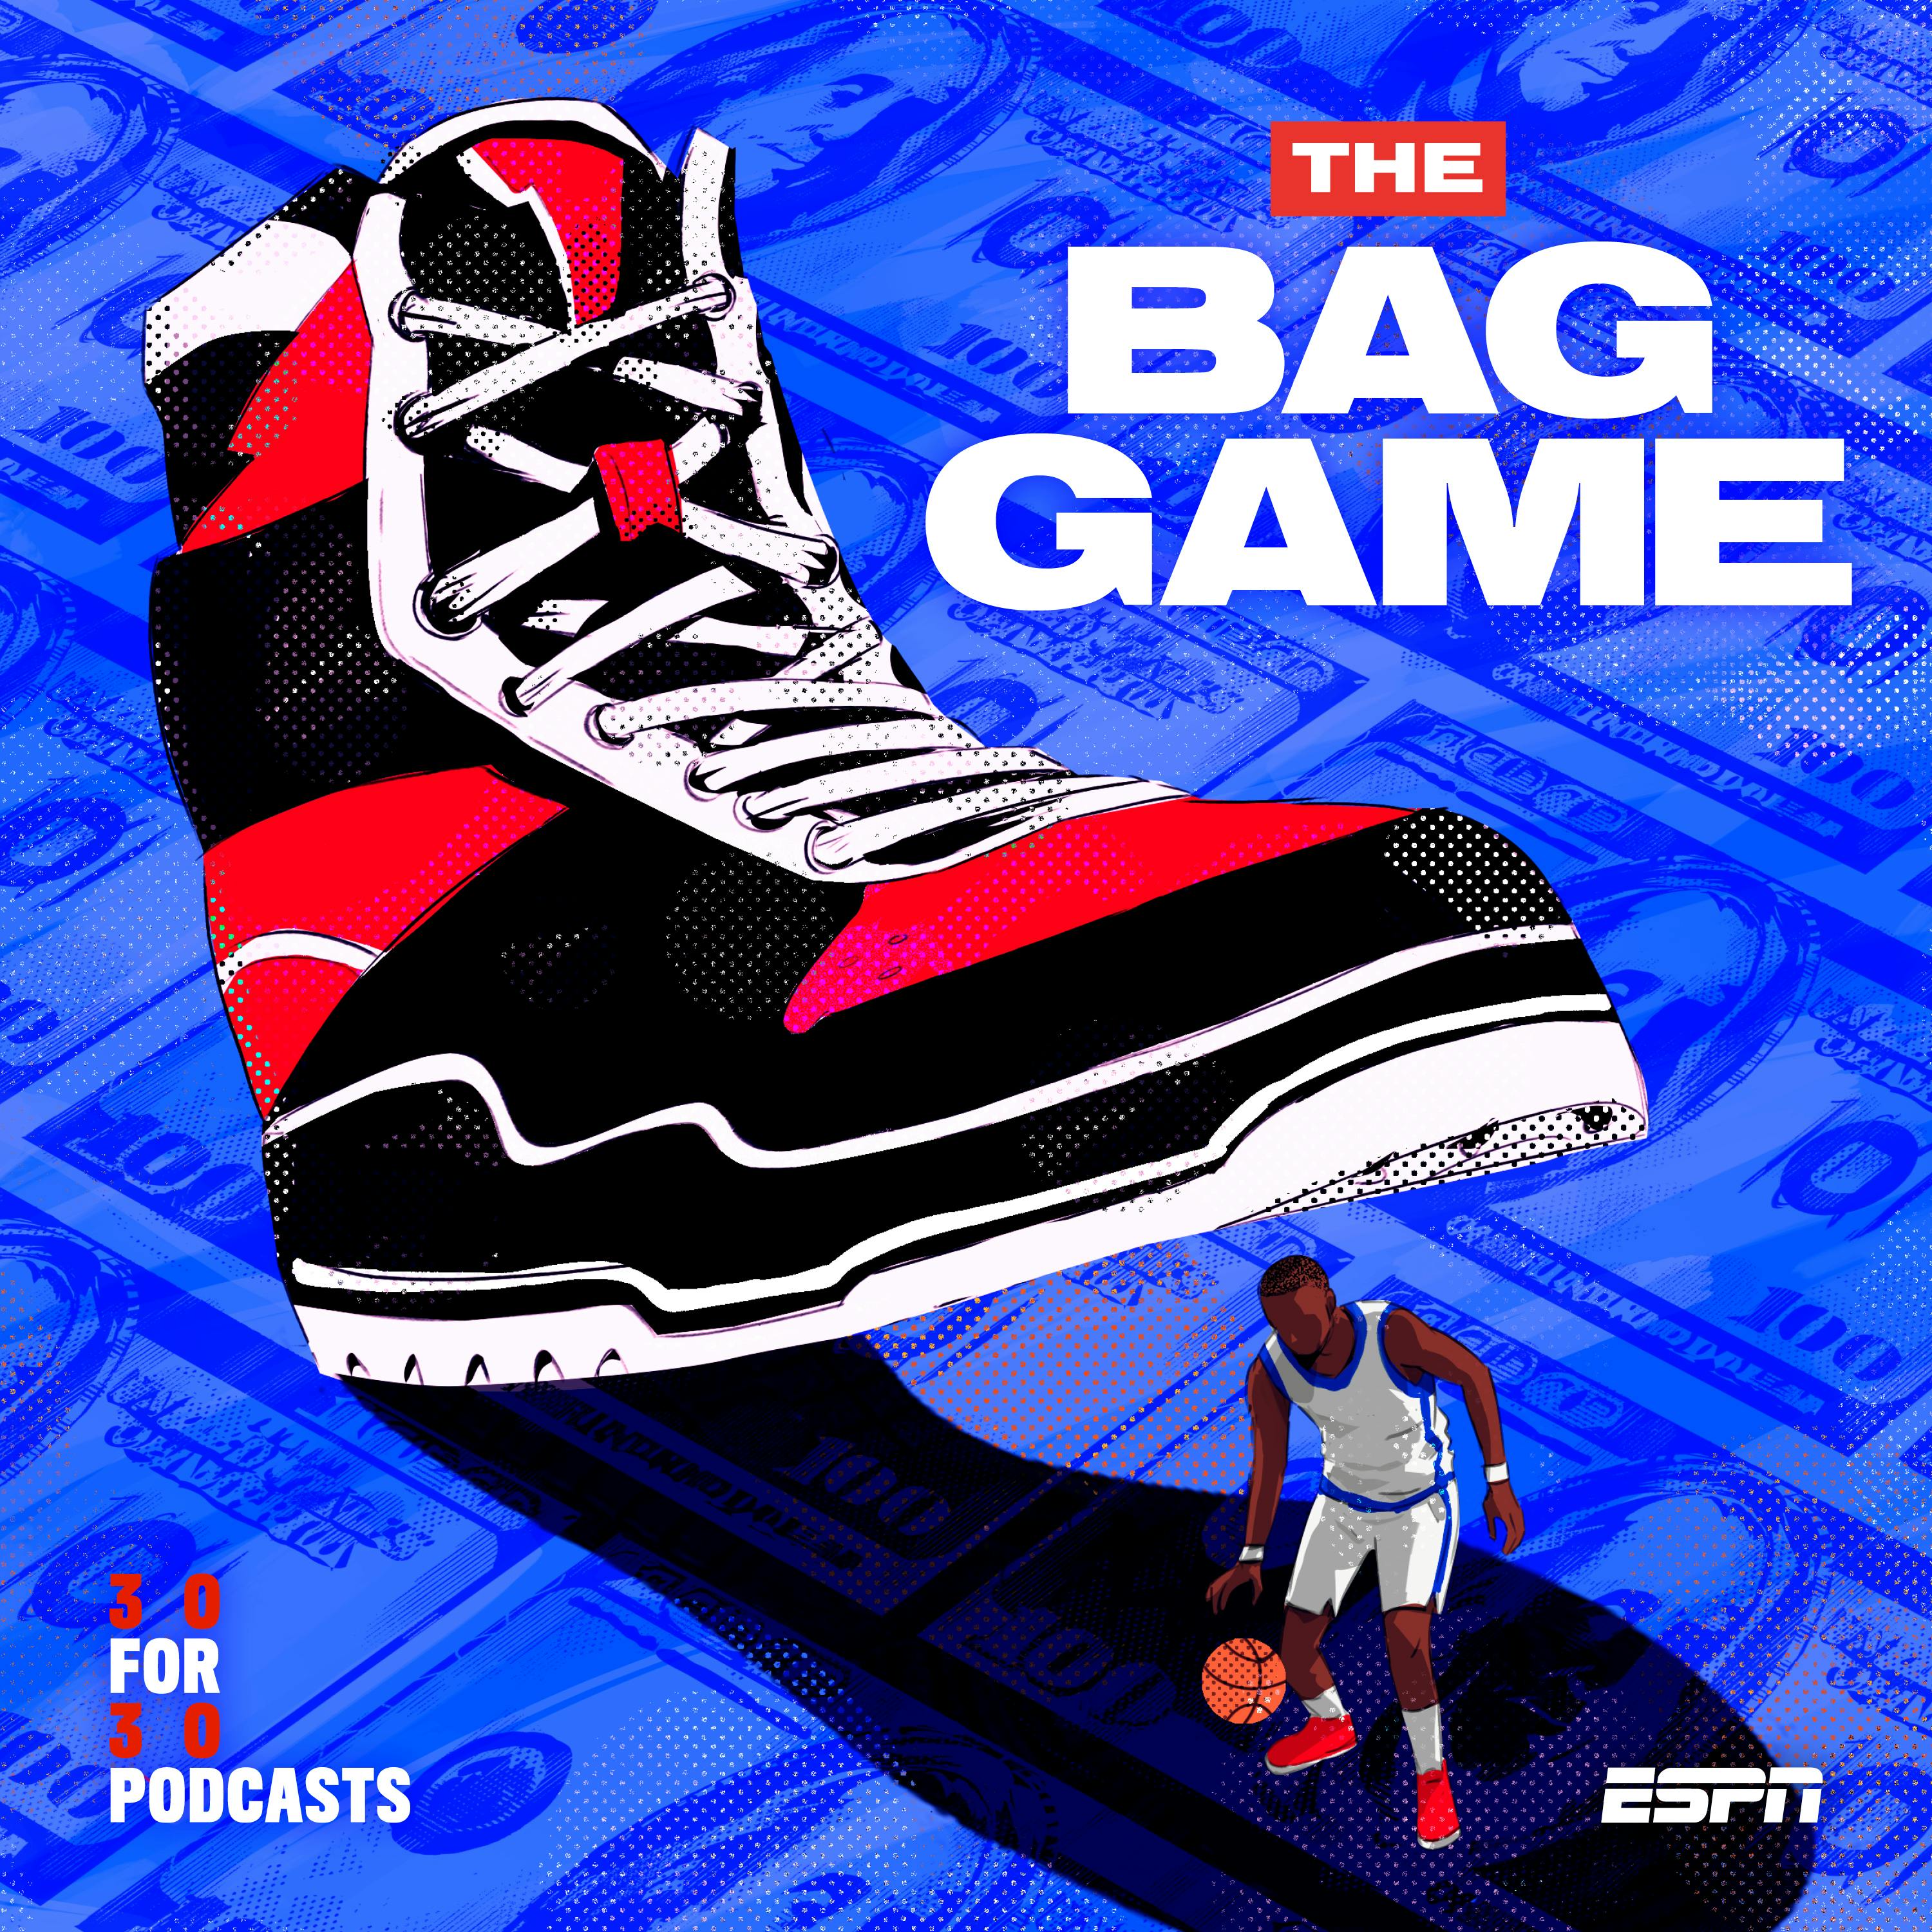 THE BAG GAME Episode 4: Plausible Deniability